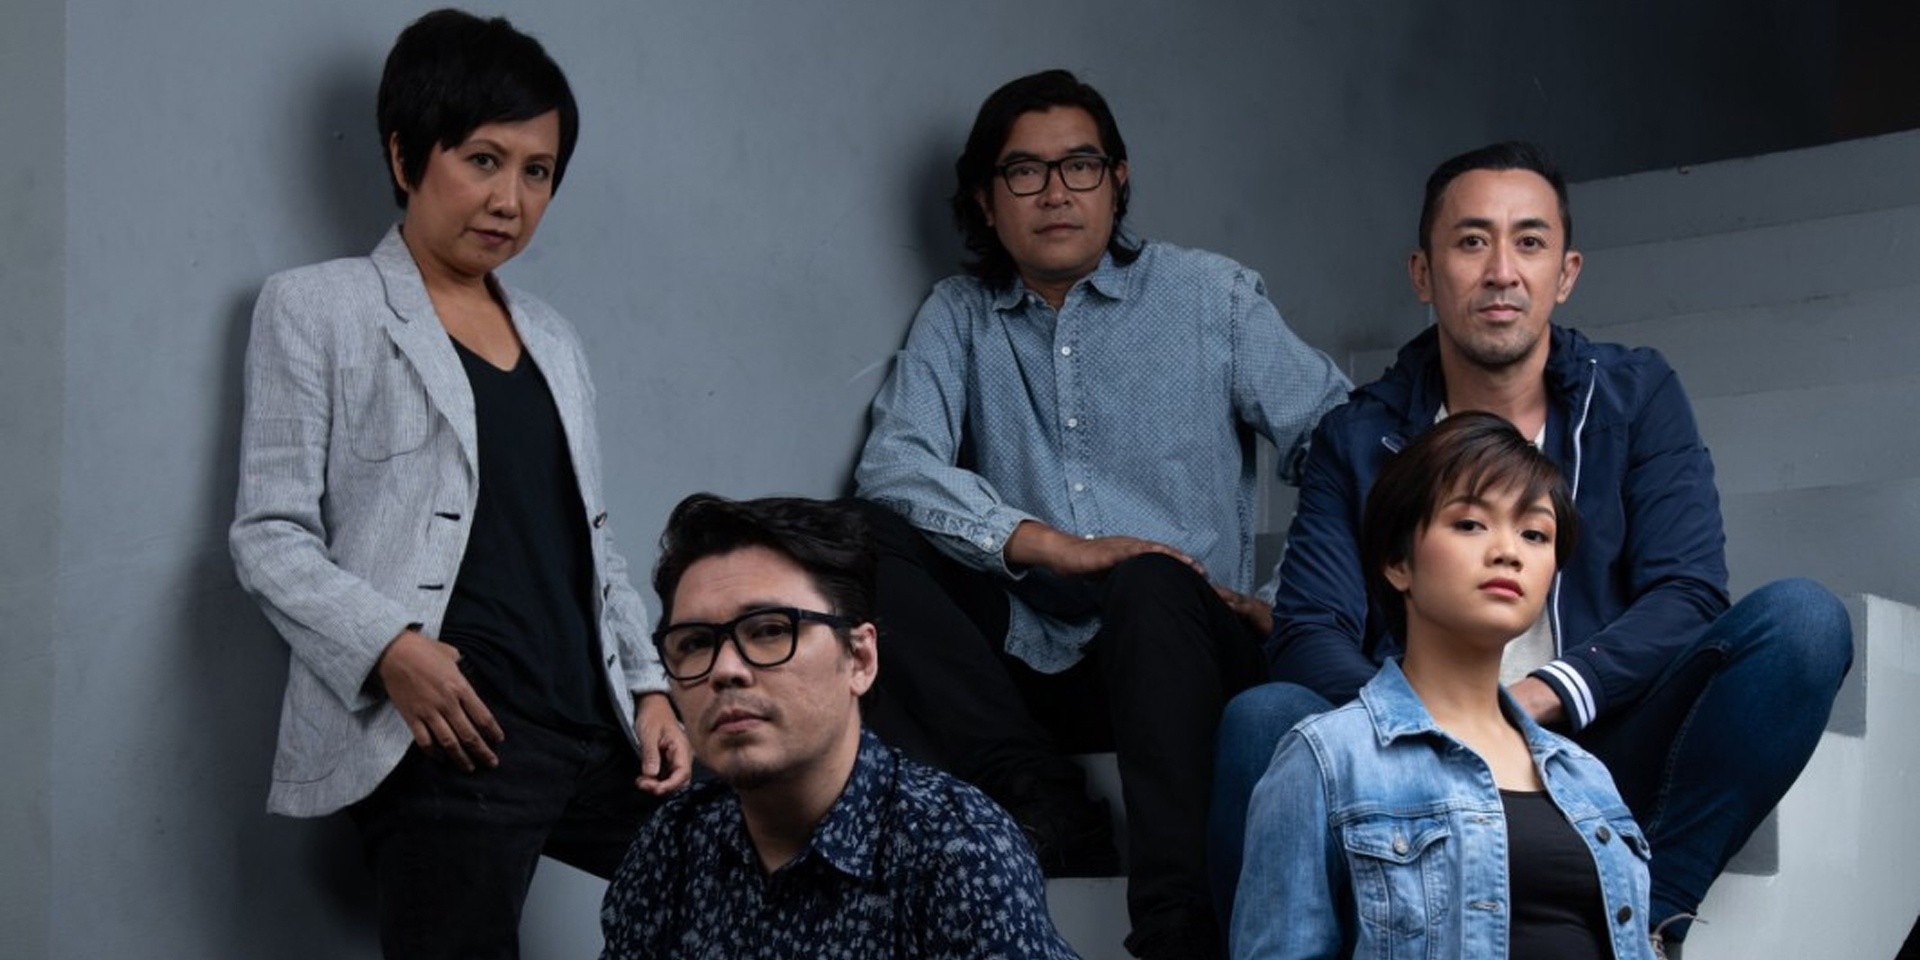 Imago reimagine their hits with Unplugged EP – listen